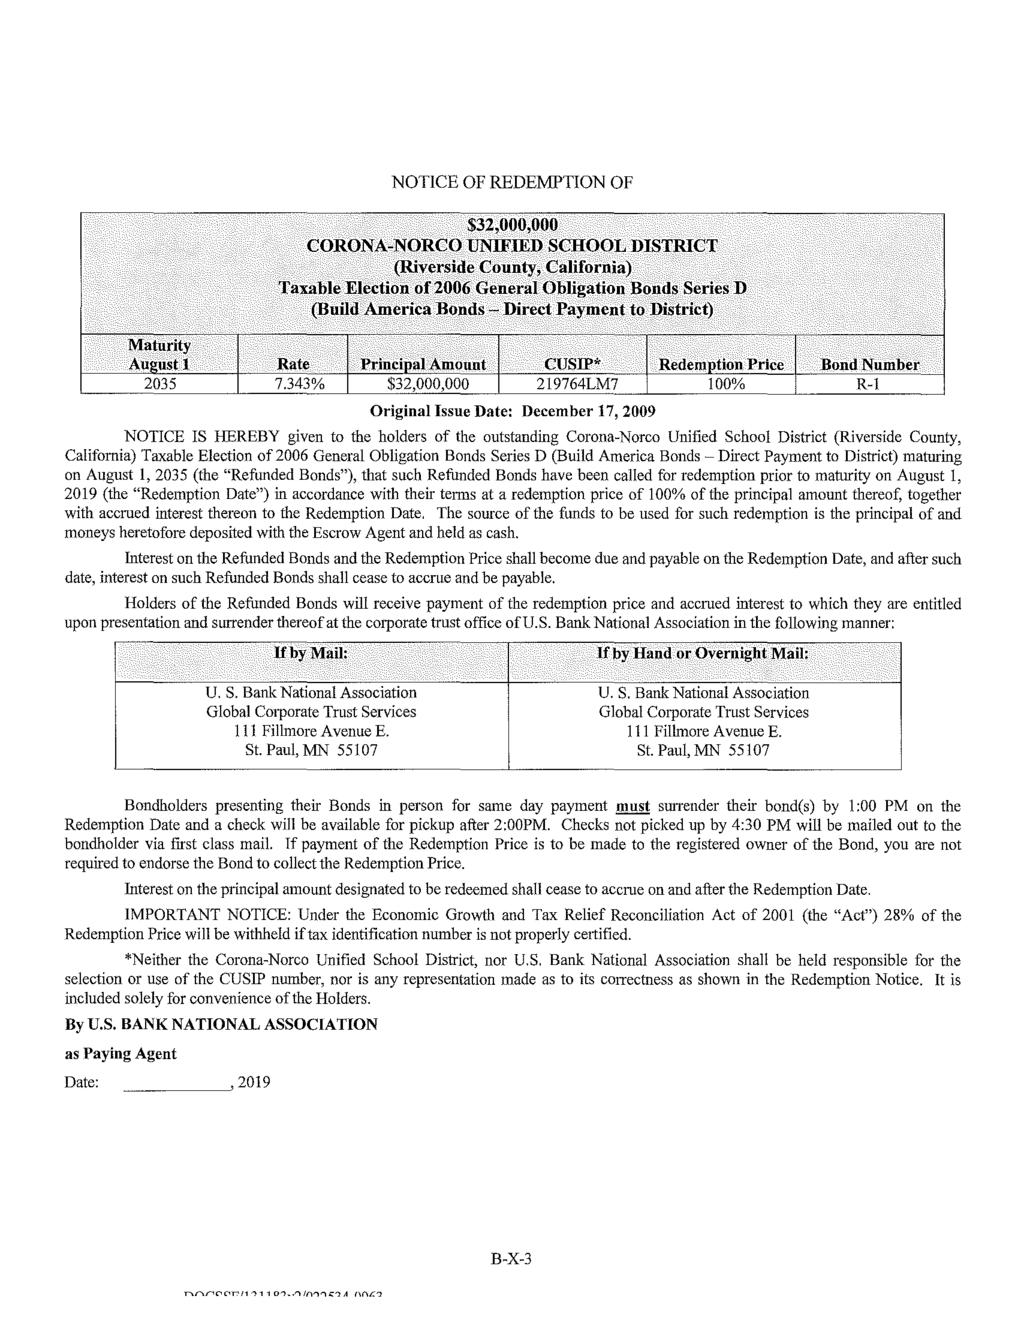 NOTICE OF REDEMPTION OF $32,000,000 Taxable Election of 2006 General Obligation Bonds Series D (Build America Bonds- Direct Payment to District) Maturity August 1 Rate Principal Amount CUSIP*